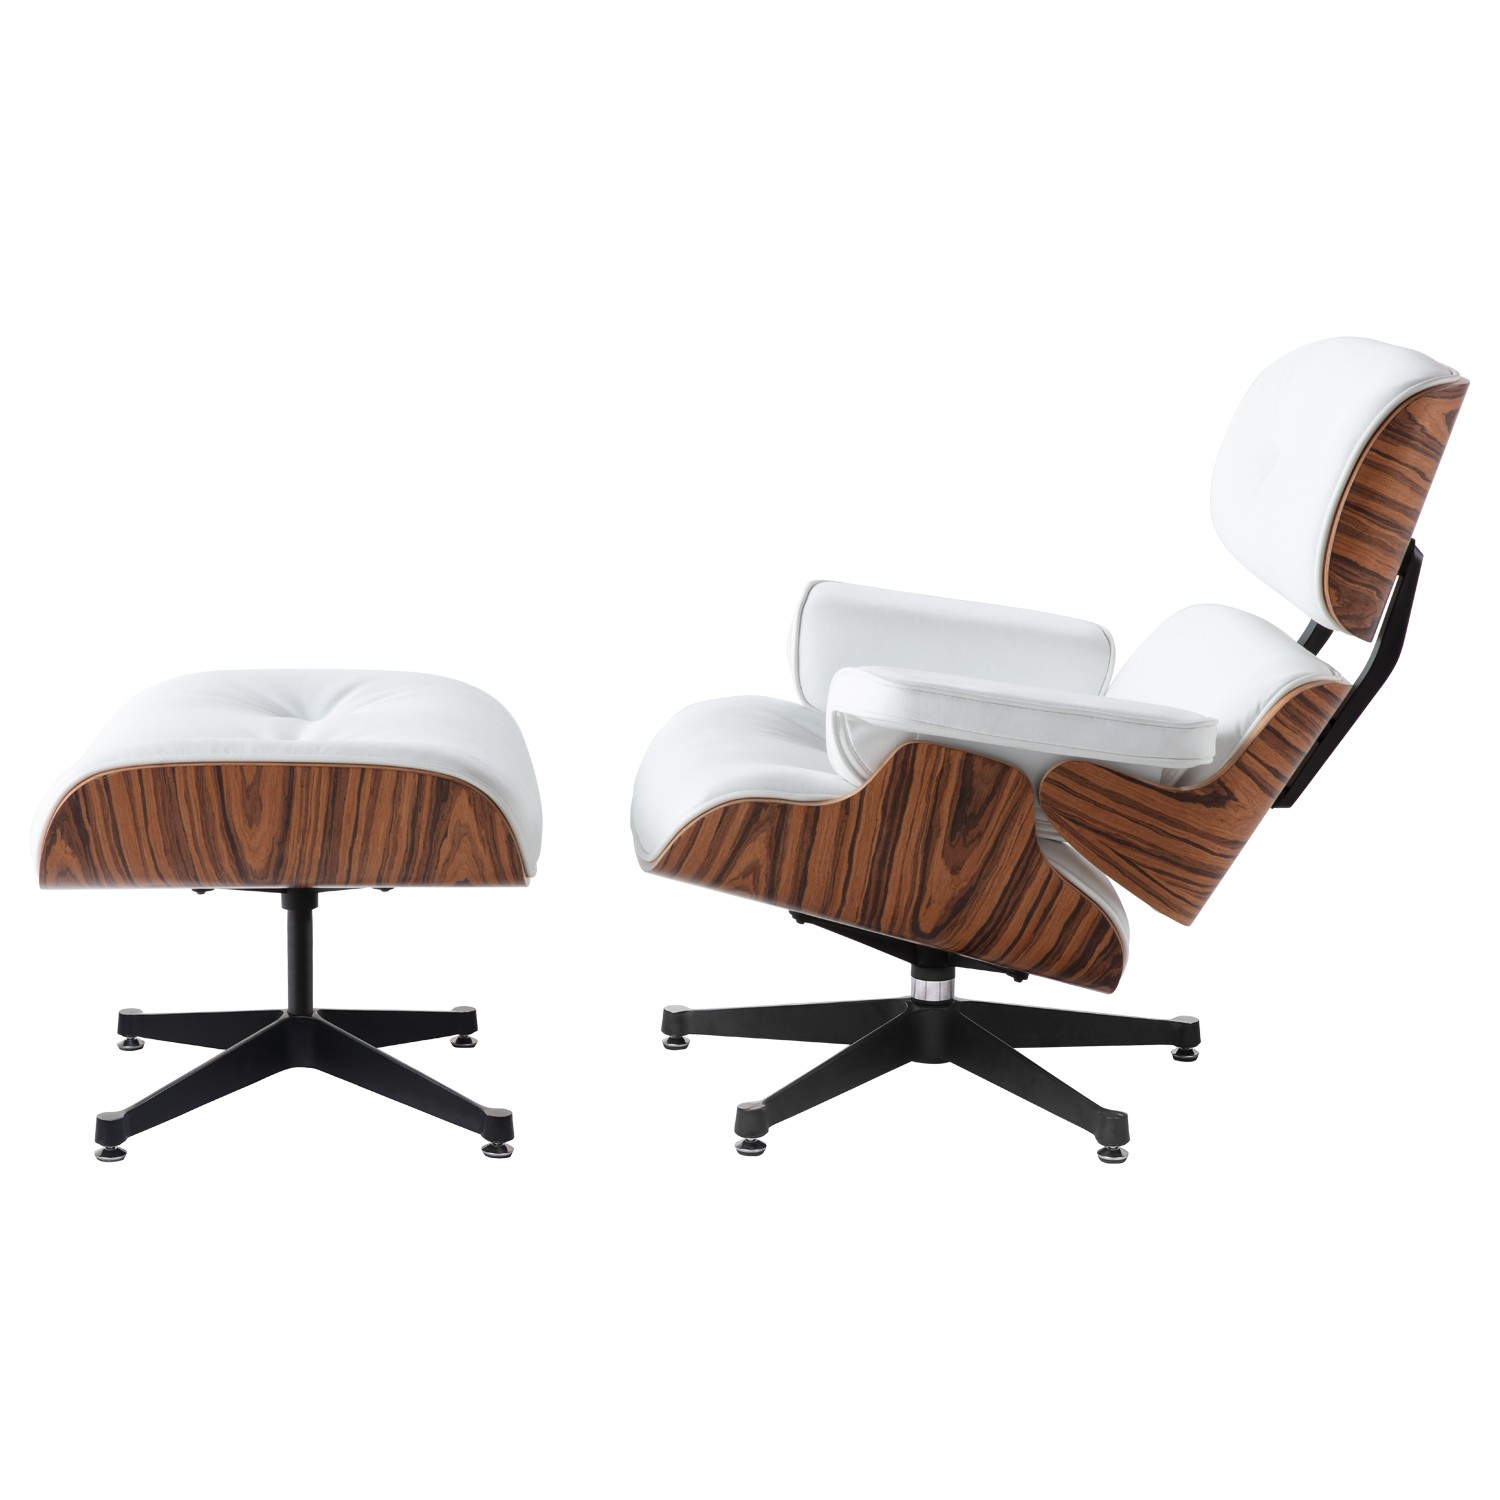 Eames Chair + Wit Retro Living Furniture